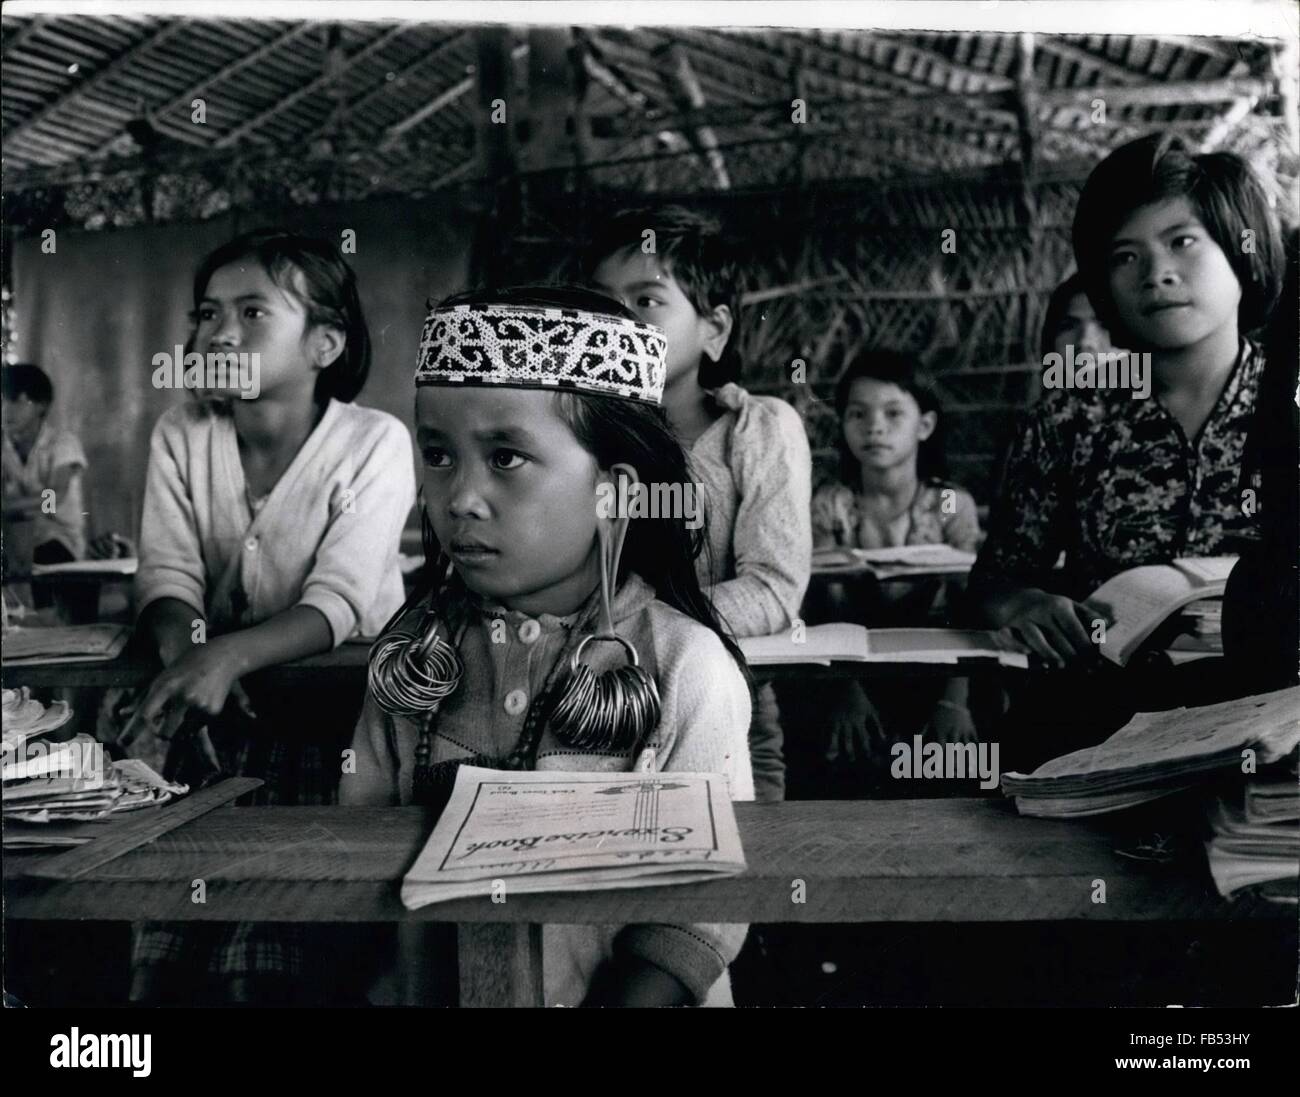 1972 - Drooping? Bejewelled Earloses - Aknd Ank Ex-Pupil At Ohio state Univ. That's Sarawak's Jungle school: A small girl sits demurely at her desk, her exercise book before her, hands in her lap, eyes fixed on her teacher just like any other good pupil. But she has a beaded crown on her head and her little ears are weighed down, dropping decorated by a cluster of glittering heavy rings. And the classroom walls are bamboo, the windows air. She is learning English in the jungle school in Bario, the Kelabit Higher Primary School which serves 2,000 square miles of Sarewaks and has 297 pupils. Mos Stock Photo